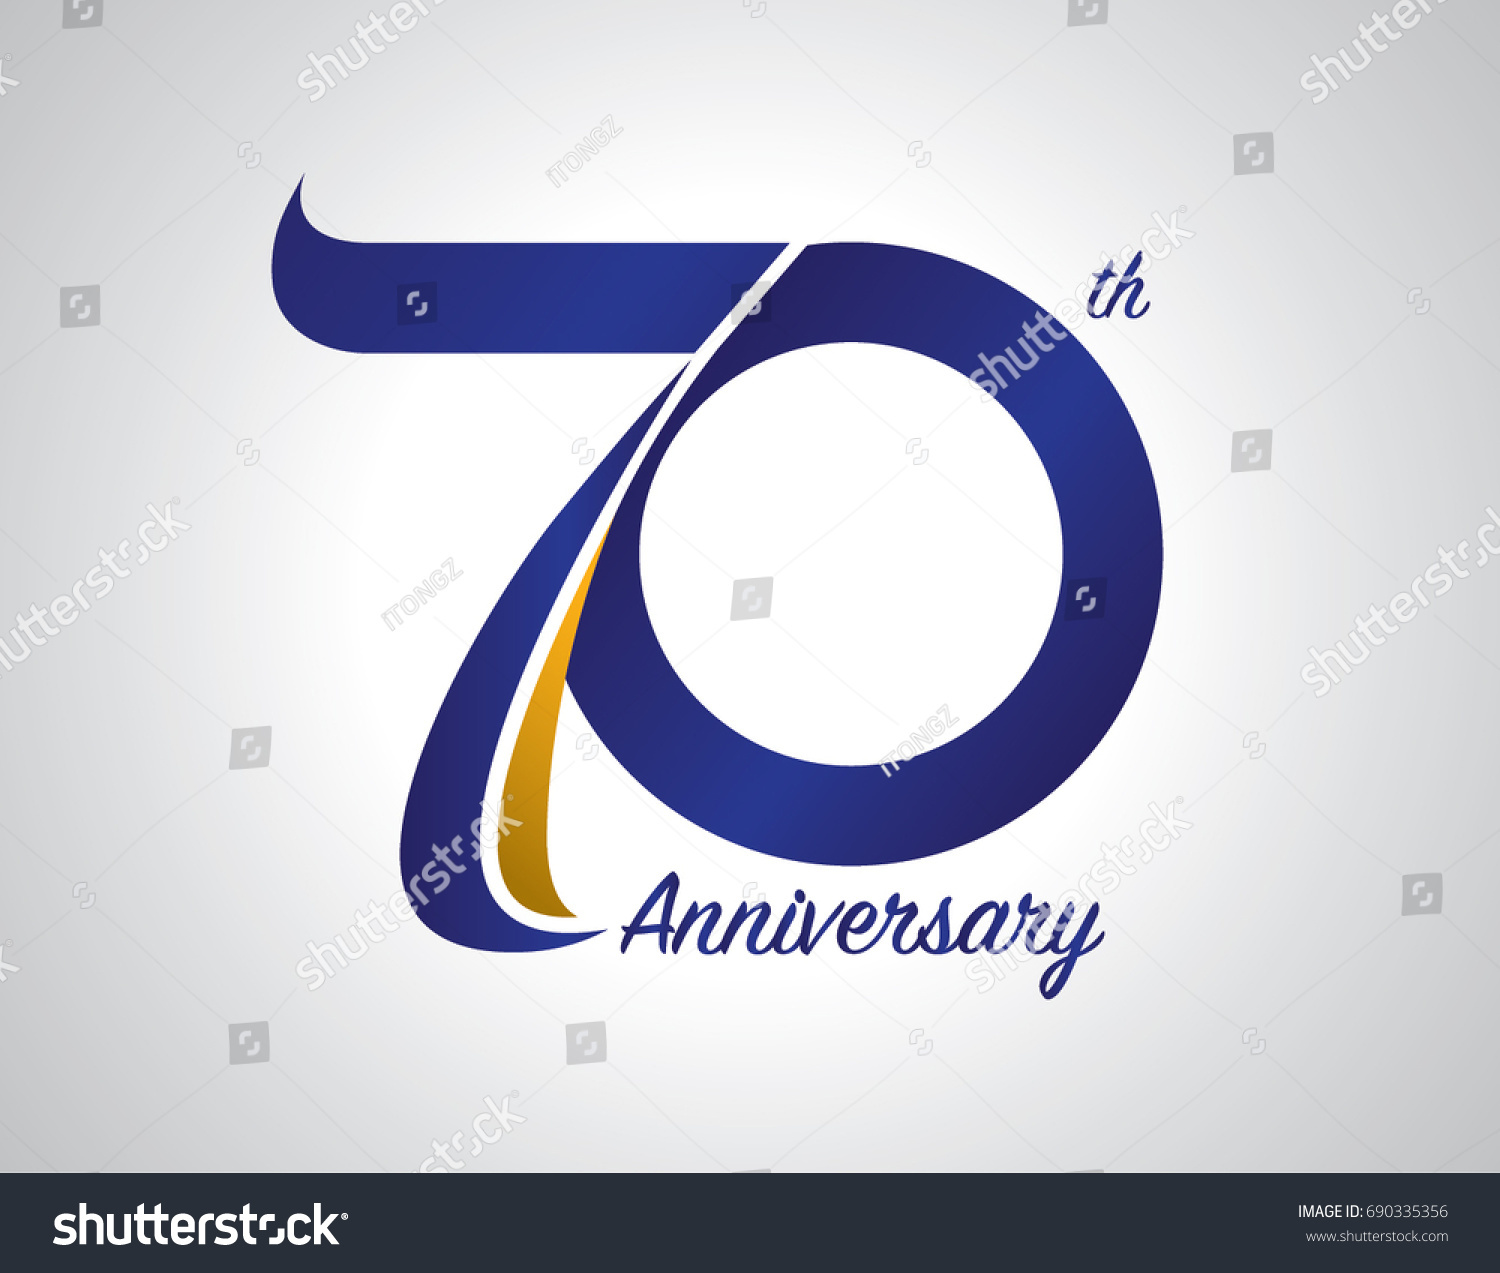 SVG of 70 years anniversary logo design with blue and old yellow color svg